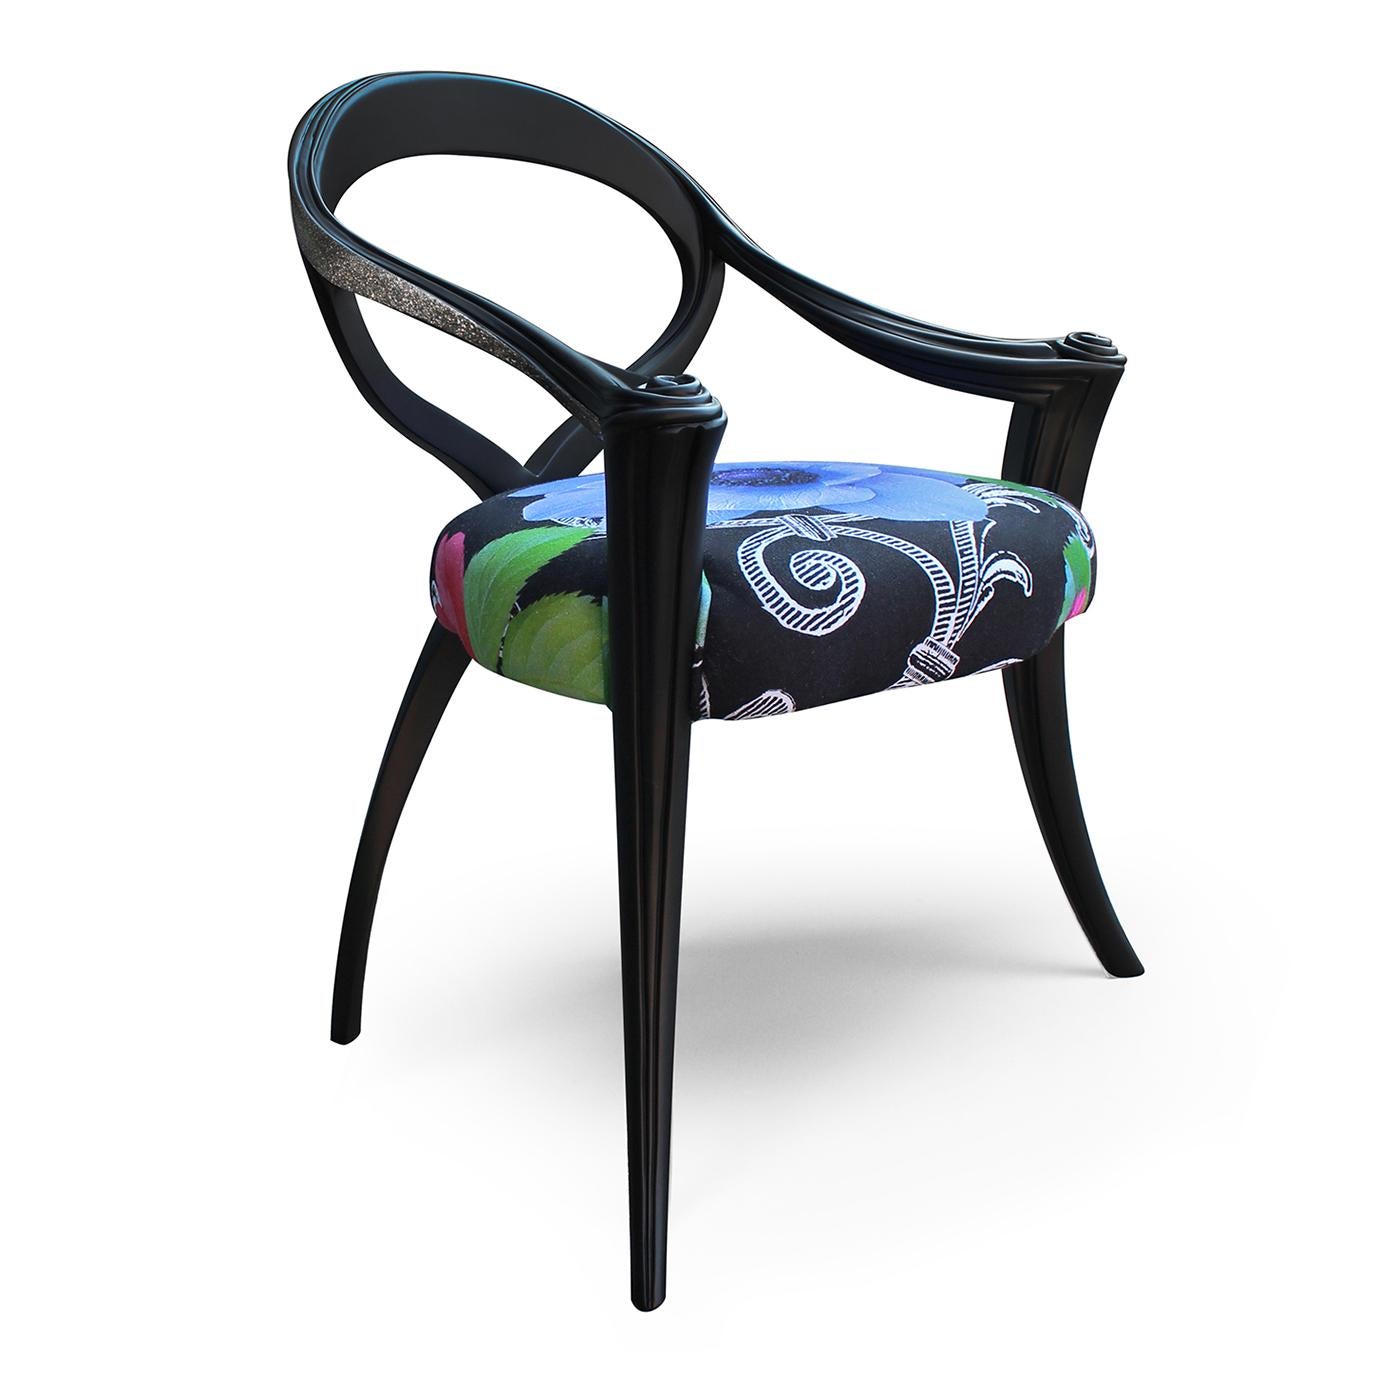 Indulge in the opulent Opus Chair Black Flower designed by Carlo Rampazzi. This exquisite piece boasts a meticulously carved wooden frame, finished with a sumptuous matte black lacquer. The lavish upholstery showcases the exclusive Black Flower